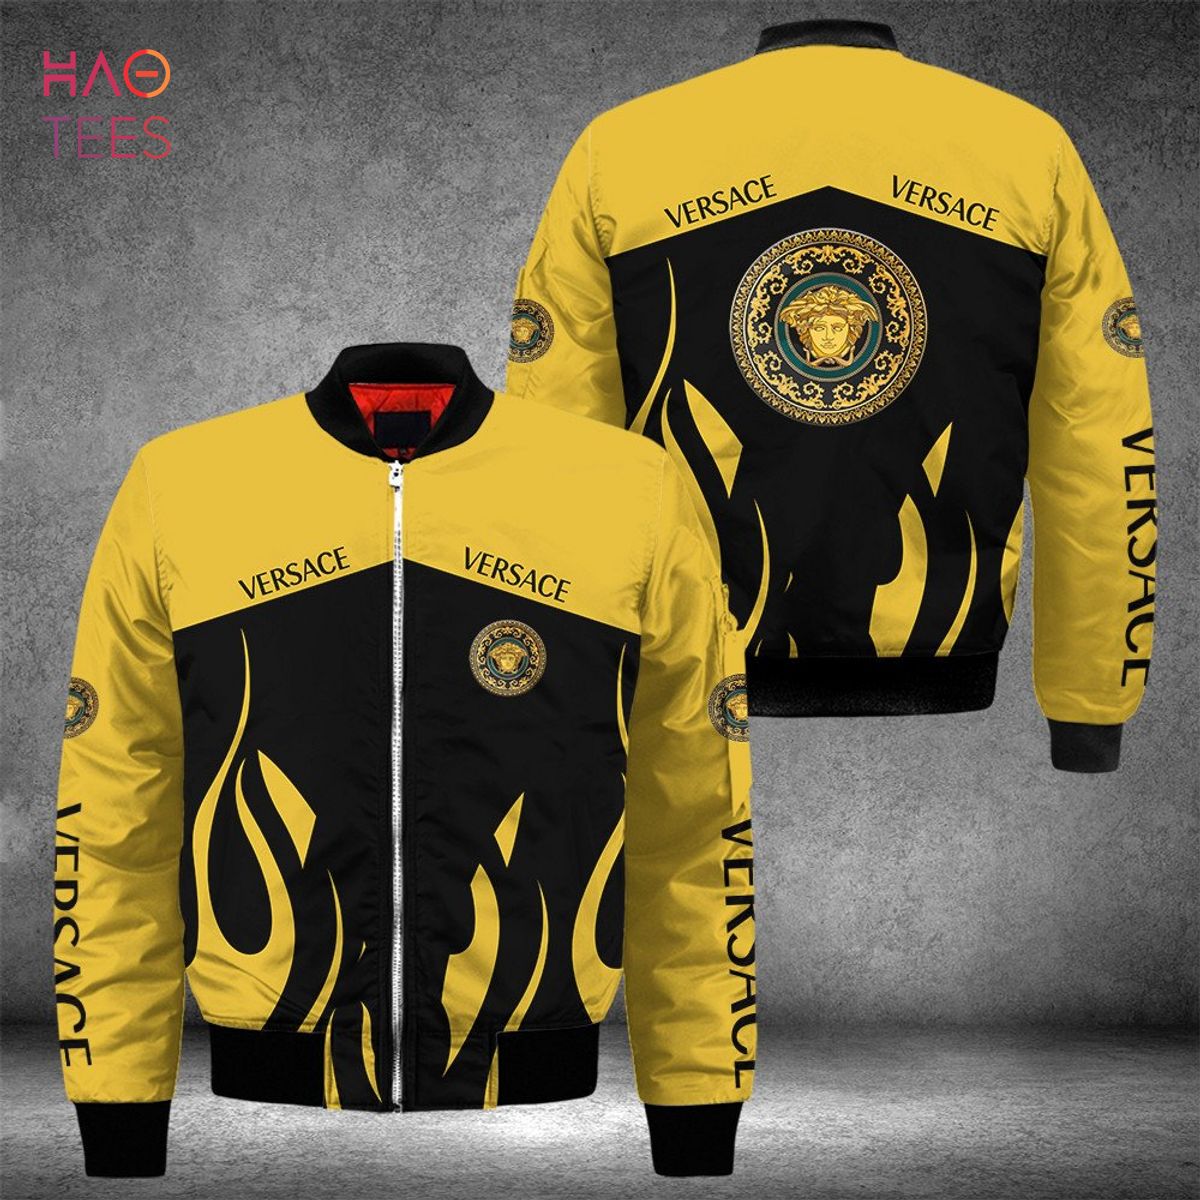 BEST Versace Luxury Brand Flame Pattern Design Bomber Jacket Limited Edition